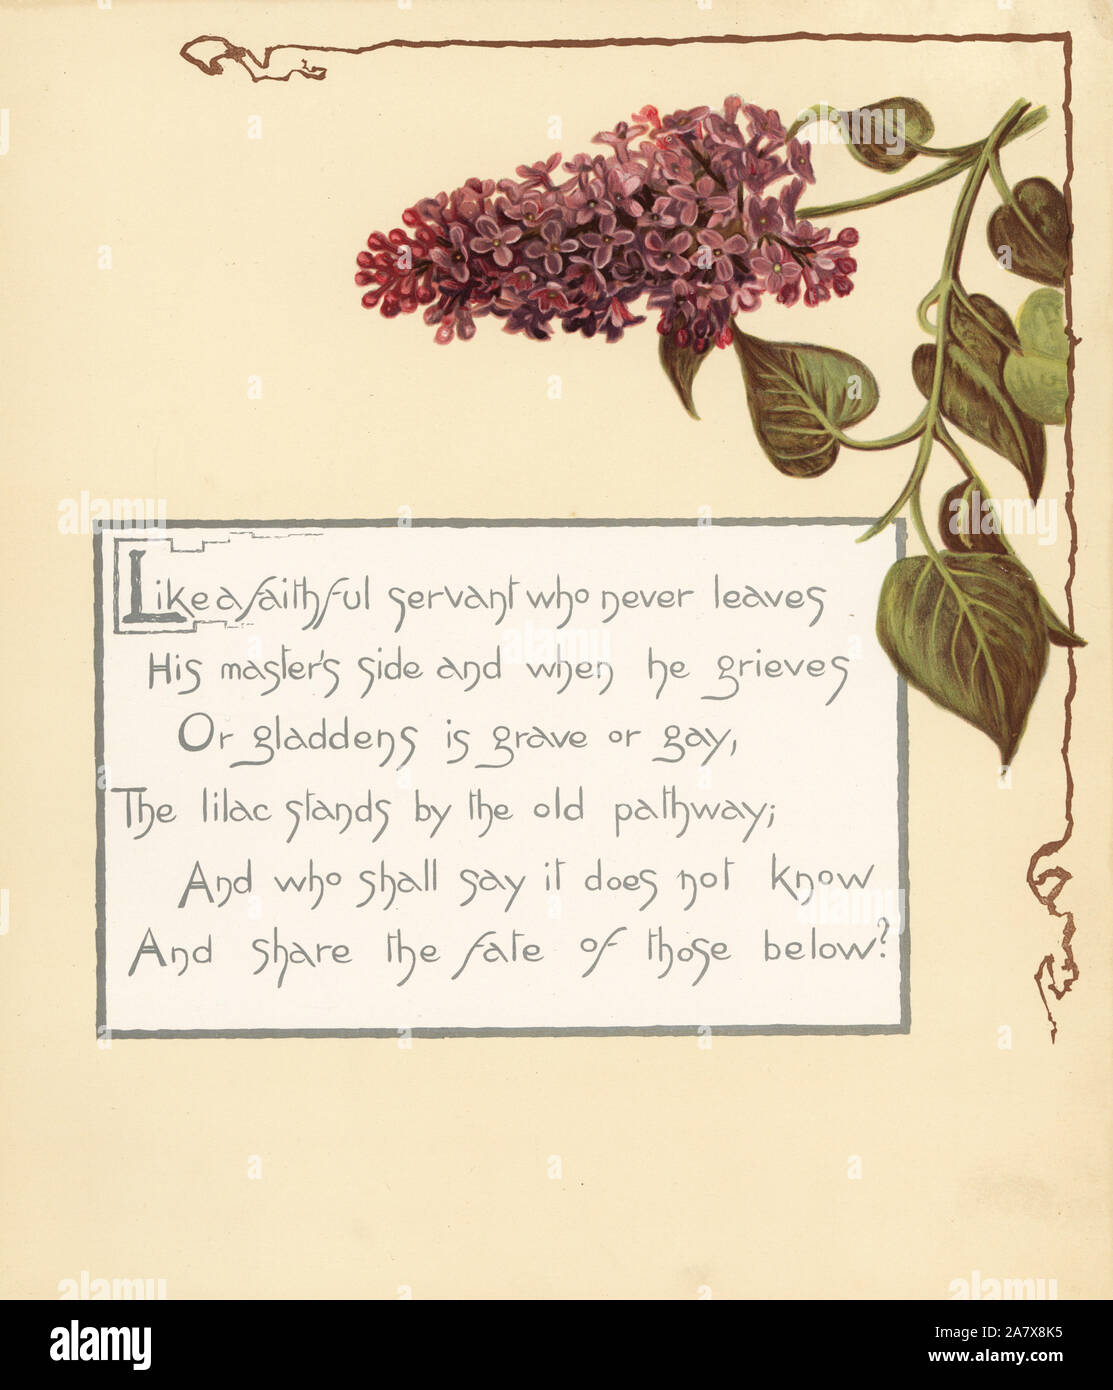 Lilac, Syringa vulgaris, and calligraphic poem. Chromolithograph by Louis Prang from Alice Ward Bailey's Flower Fancies, Boston, 1889. Illustrated by Lucy Baily, Eleanor Ecob Morse, Olive Whitney, Ellen Fisher, Fidelia Bridges, C. Ryan and F. Schuyler Mathews. Stock Photo